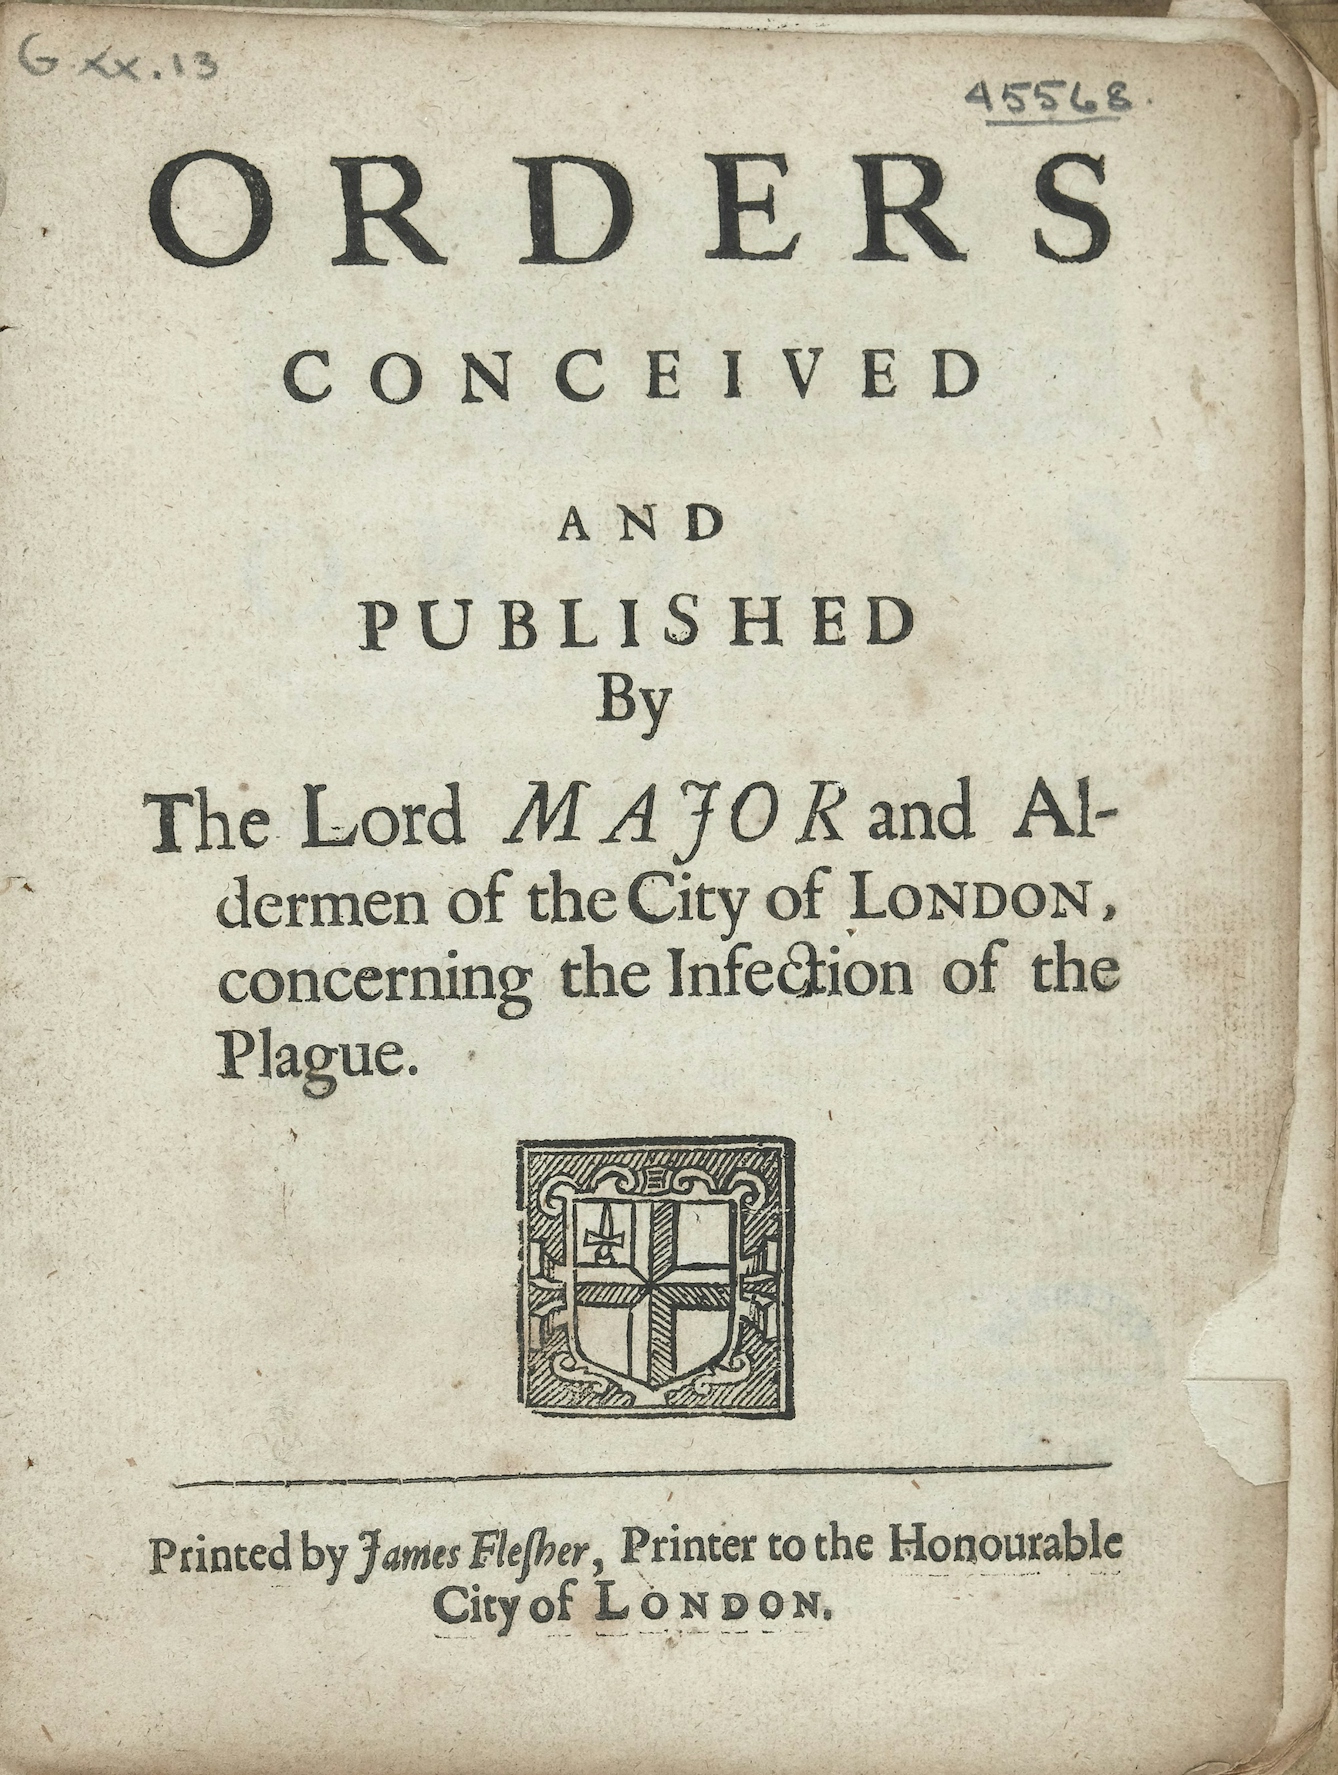 Orders conceived and published concerning the infection of the plague, 1665